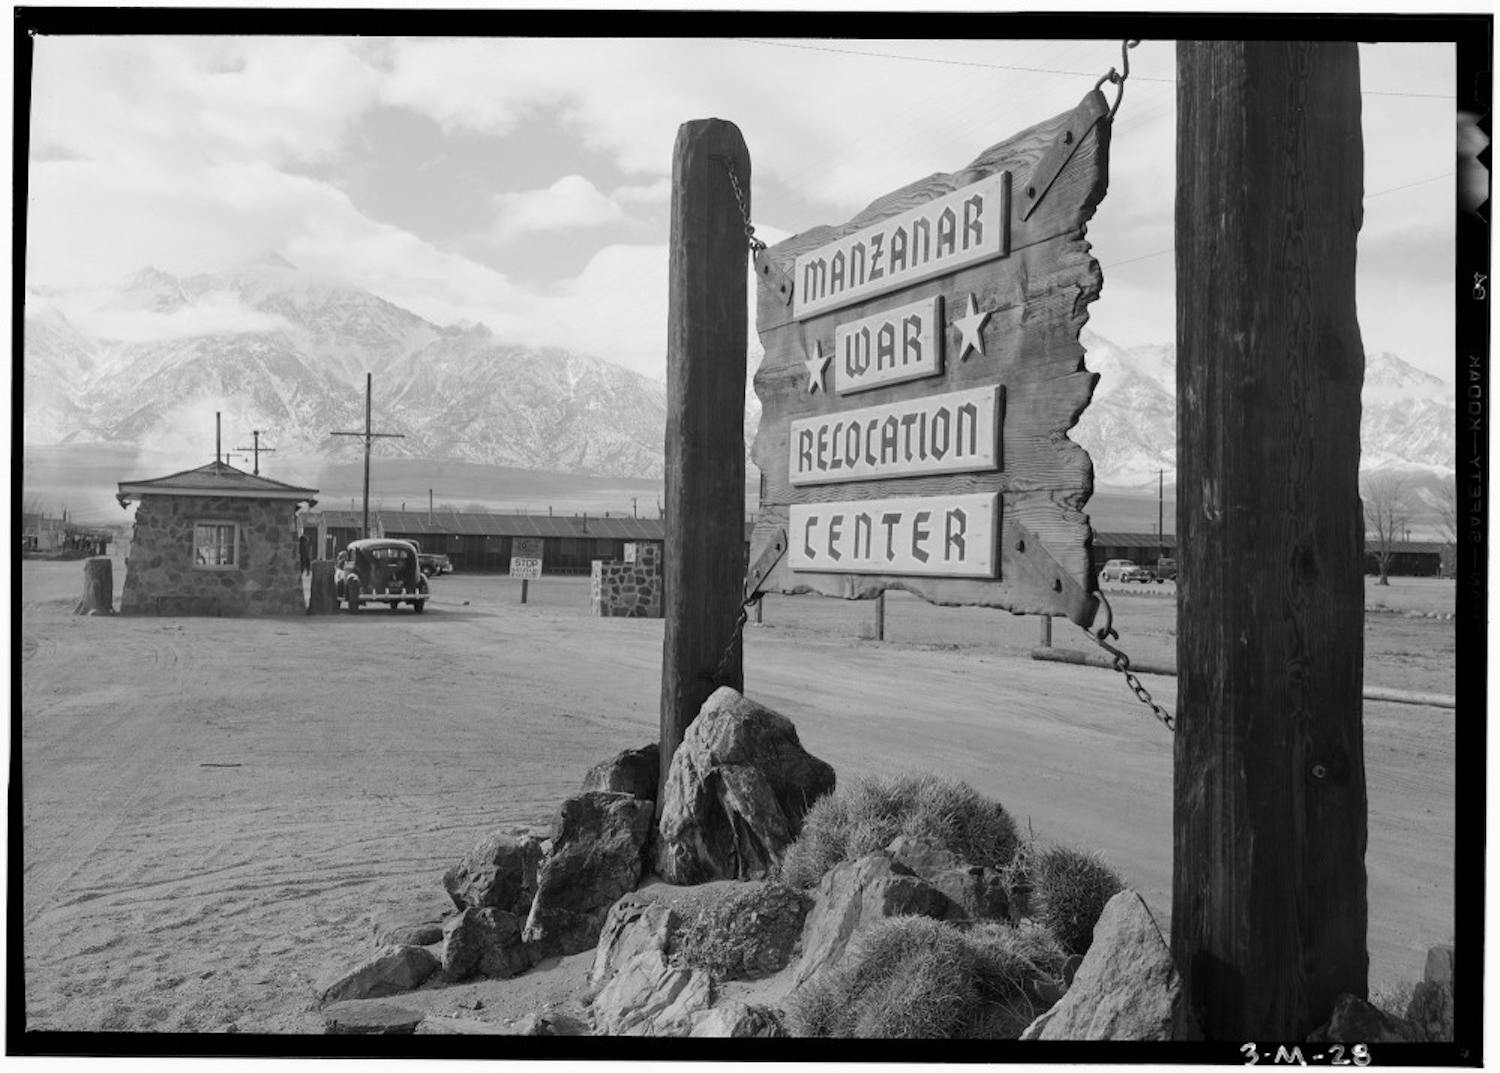 This is the entrance to Manzanar Relocation Center in California in 1943, where 110,000 Japanese Americans were detained. The Monroe County Public Library screened four short films about Japanese internment during World War II on Saturday to preface its upcoming "Power of Words" event.